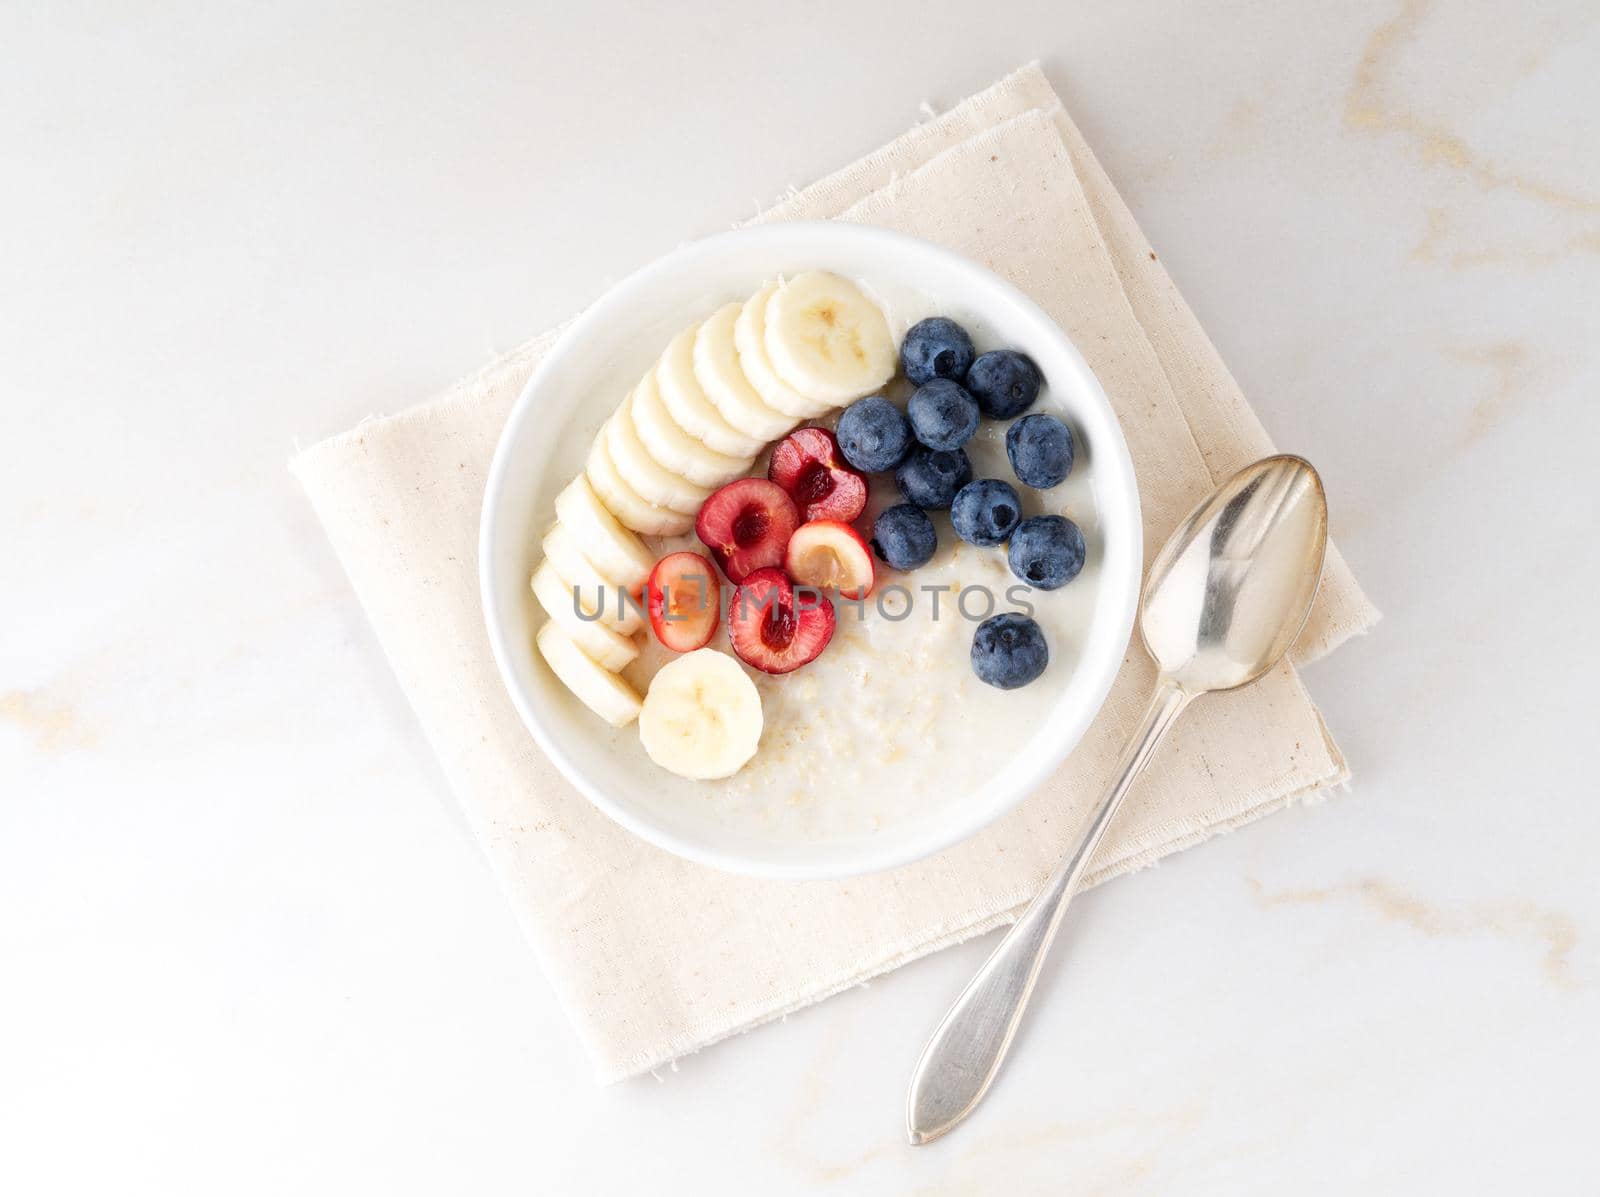 Large bowl of tasty and healthy oatmeal with a fruits and berry for Breakfast, morning meal. Top view, white marble table